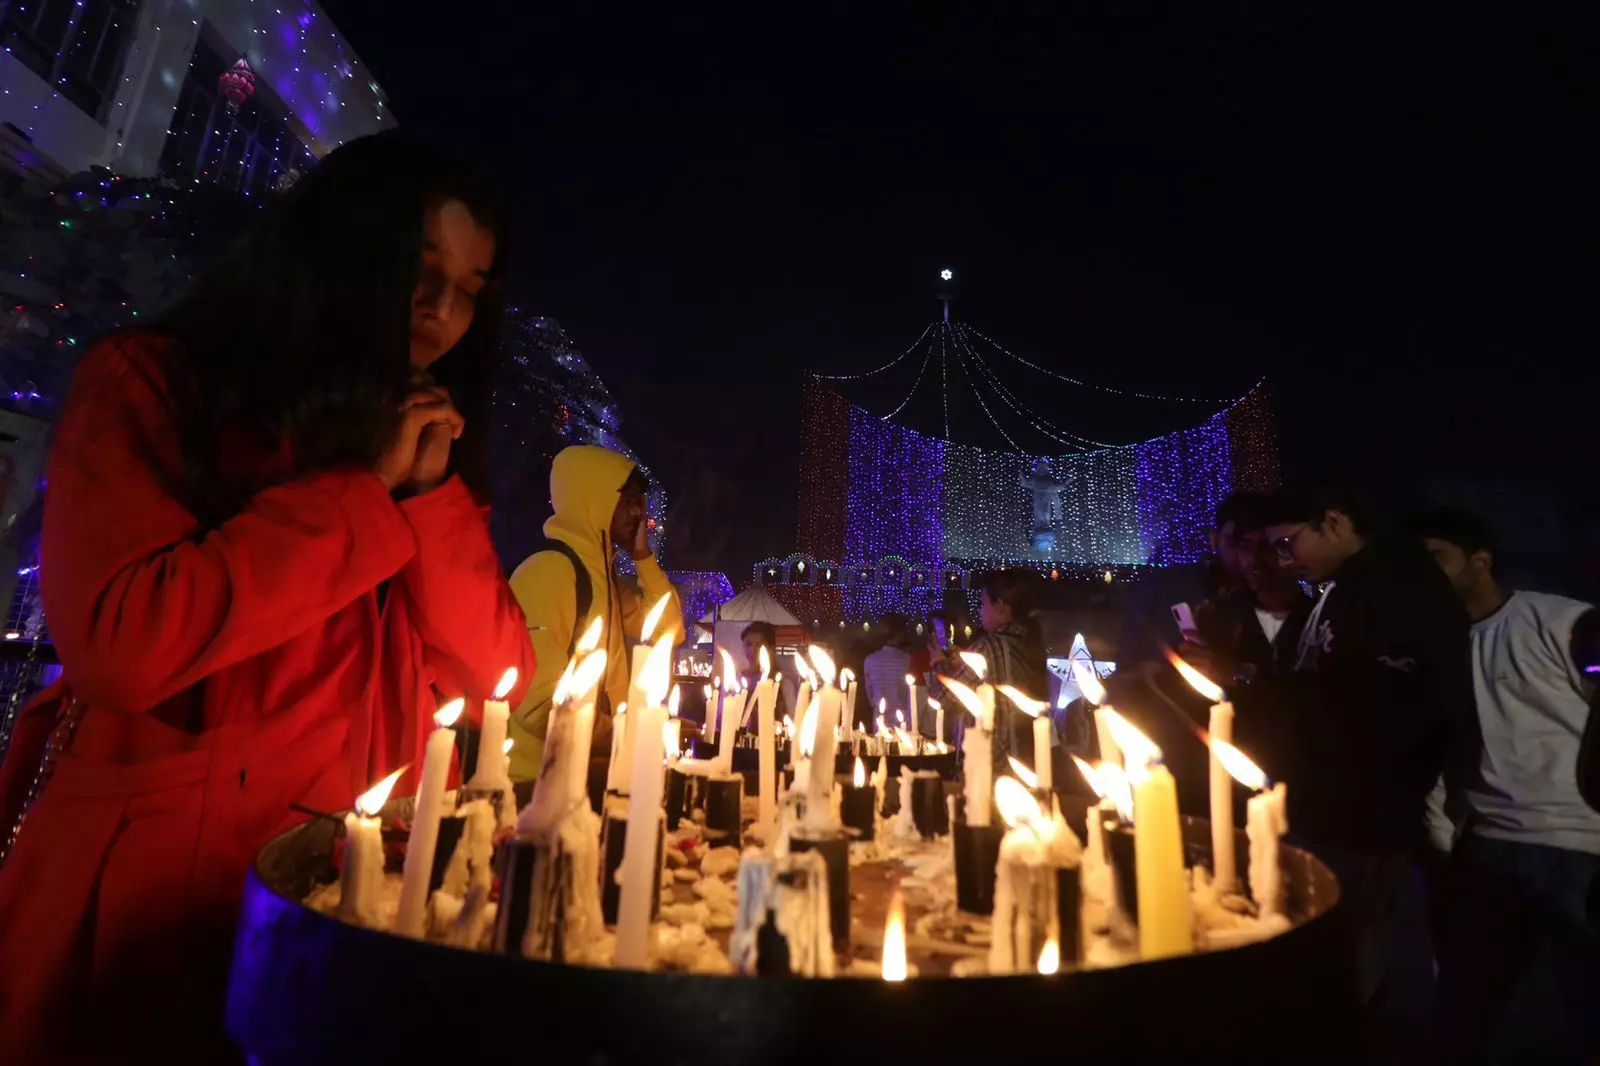 Christmas Day: People praying by lighting candles at Cathedral Church on Christmas Eve, see photos